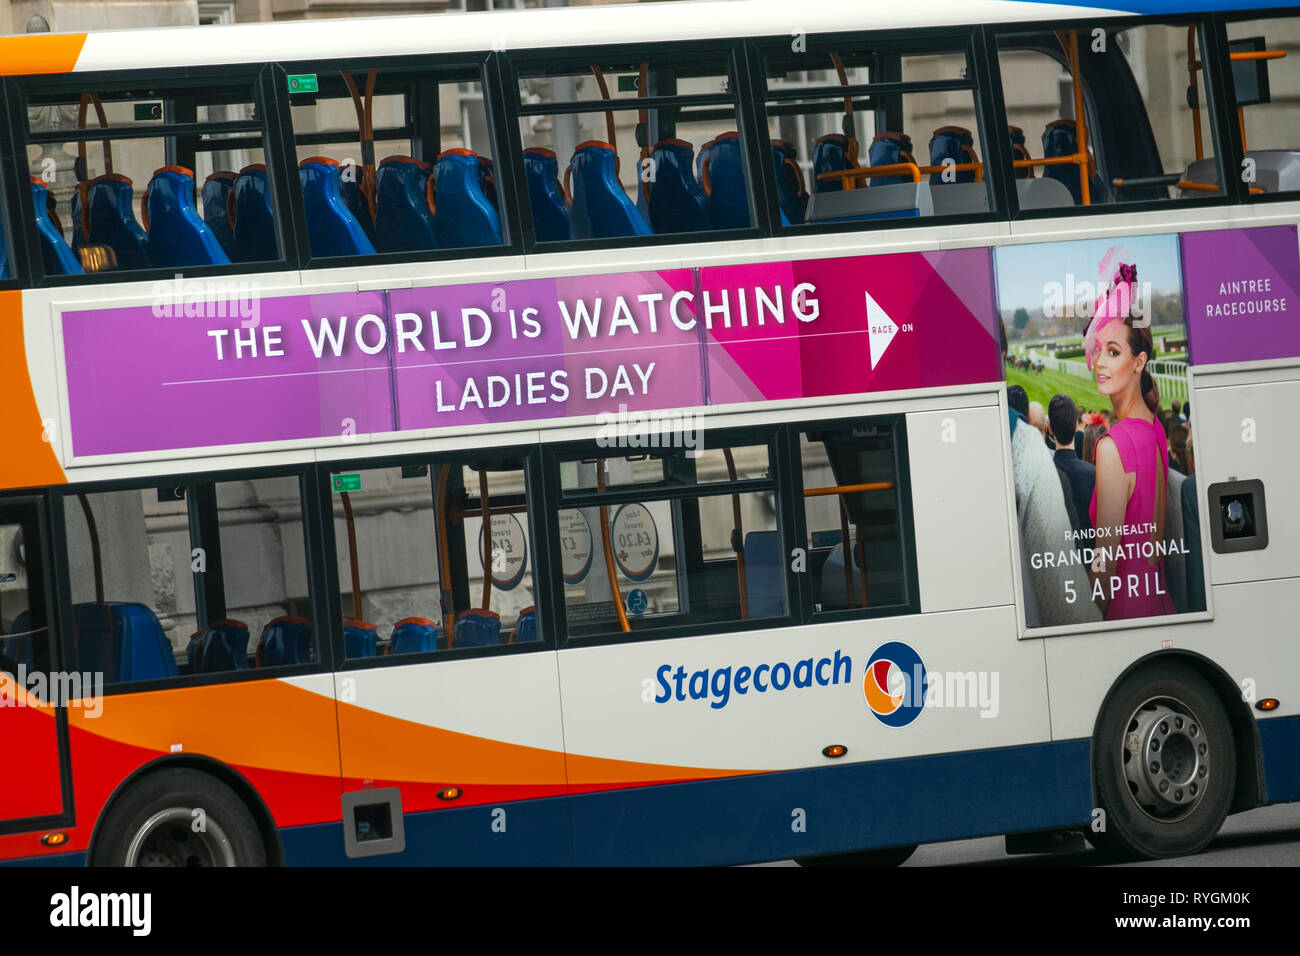 Aintree racecourse Randox Grand National Stagecoach bus advertising Ladies Day in Liverpool City Centre, UK Stock Photo